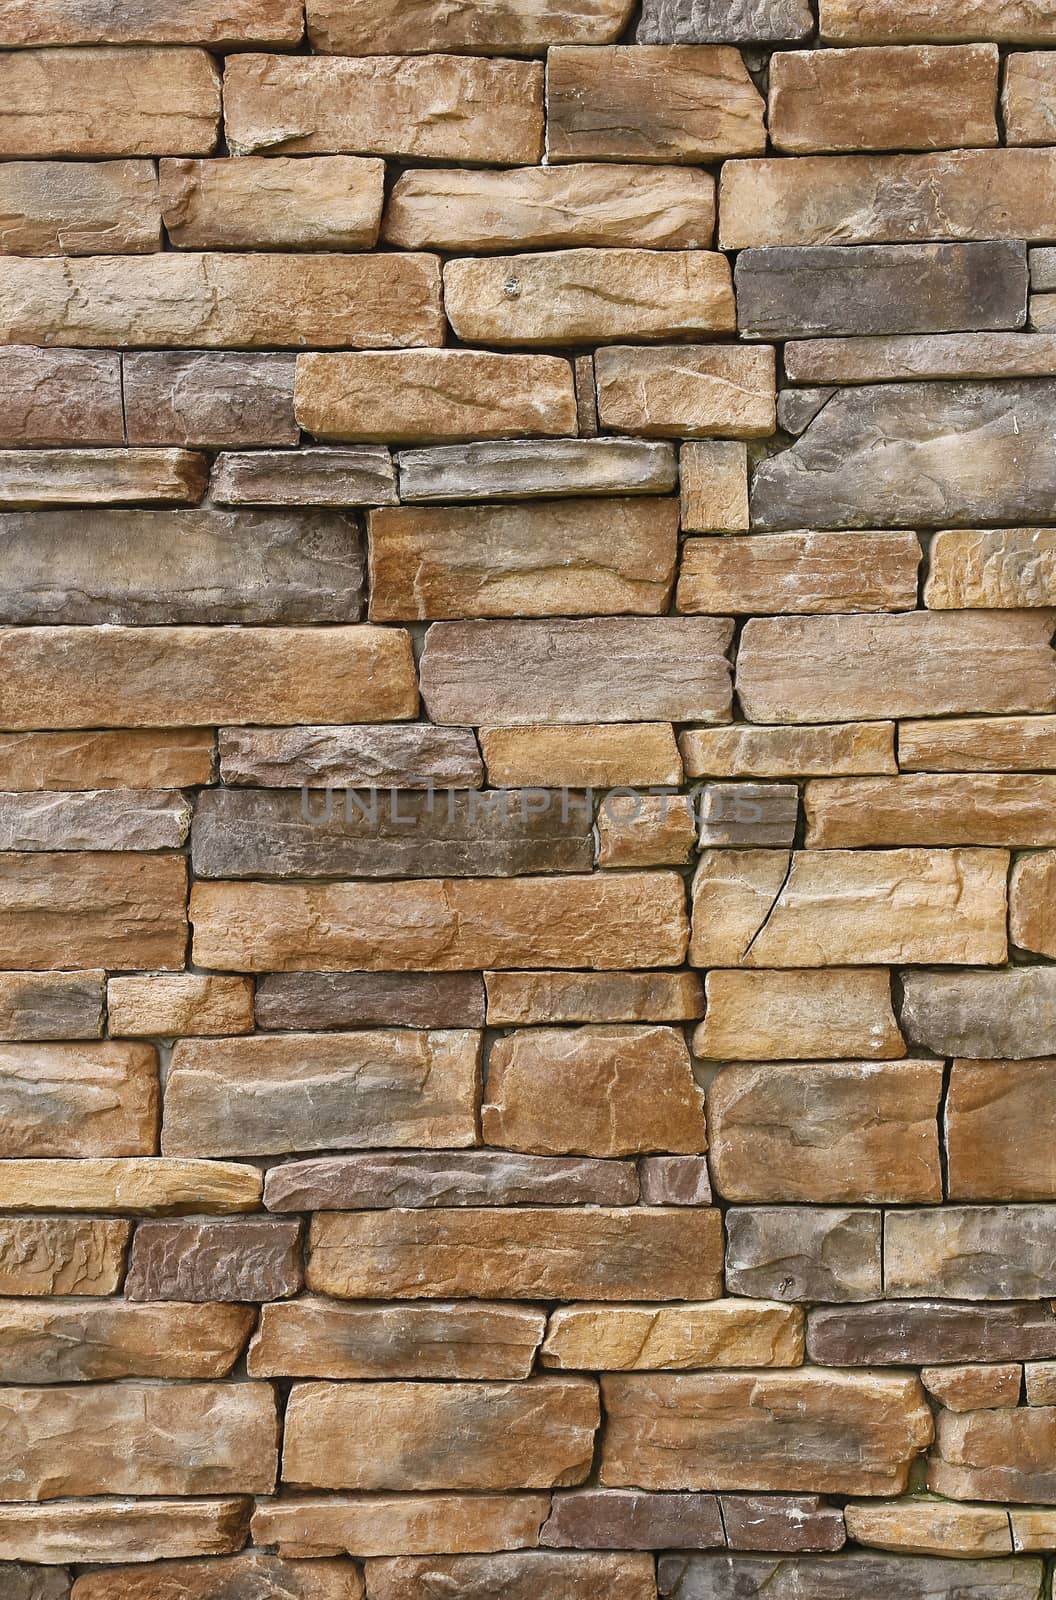 Pattern of old stone Wall